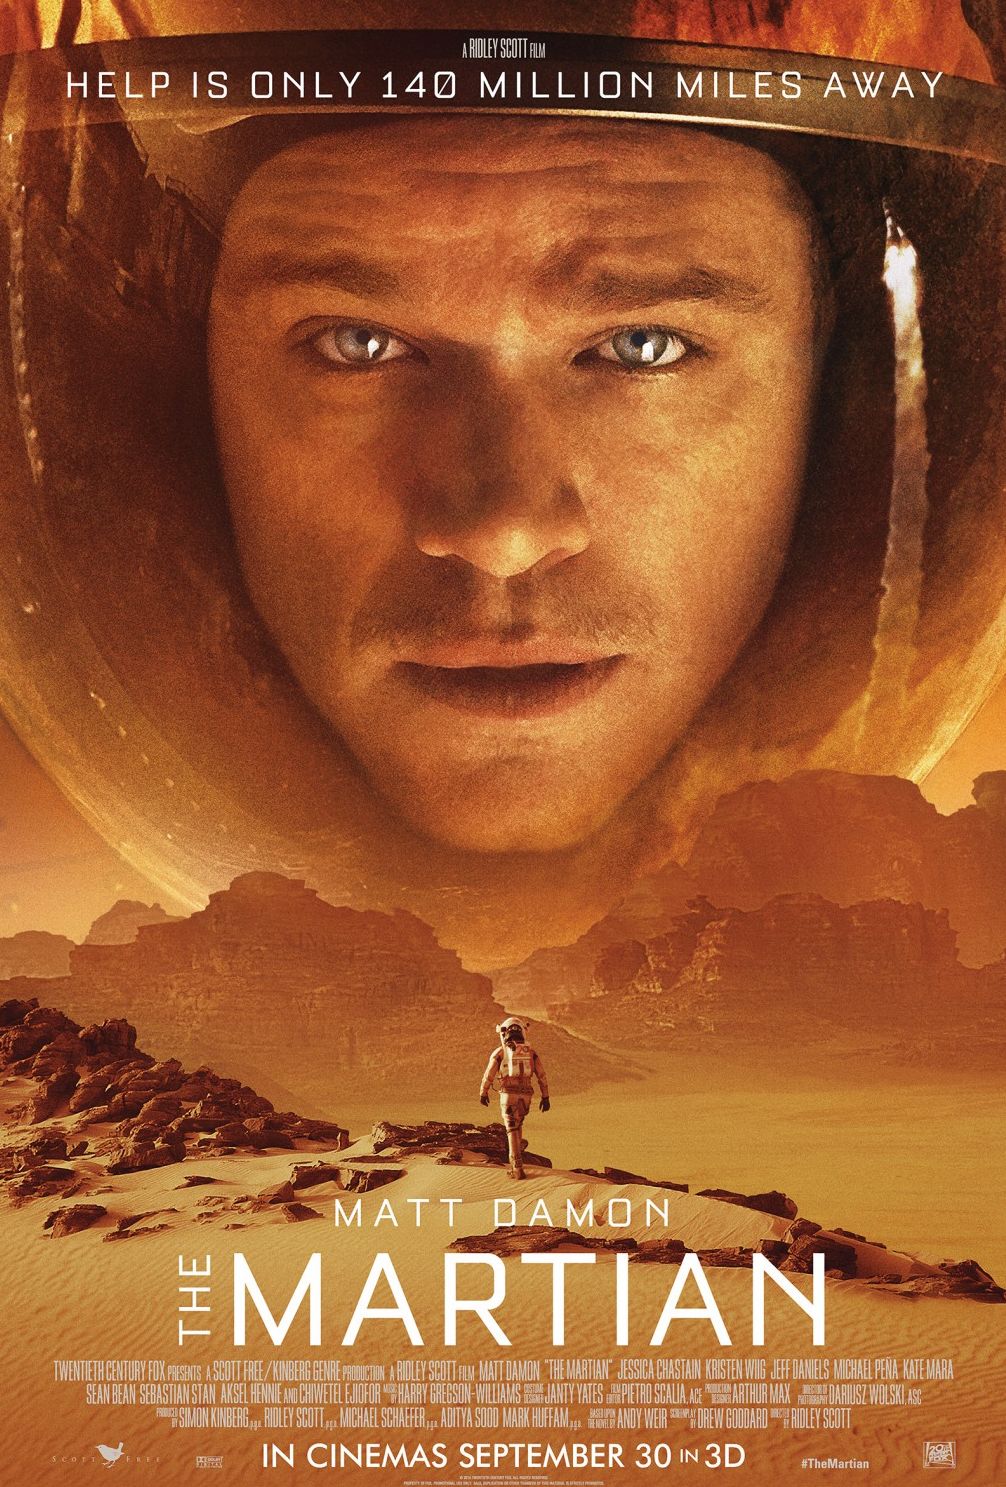 The Martian Poster: Help Is Only 140 Million Miles Away